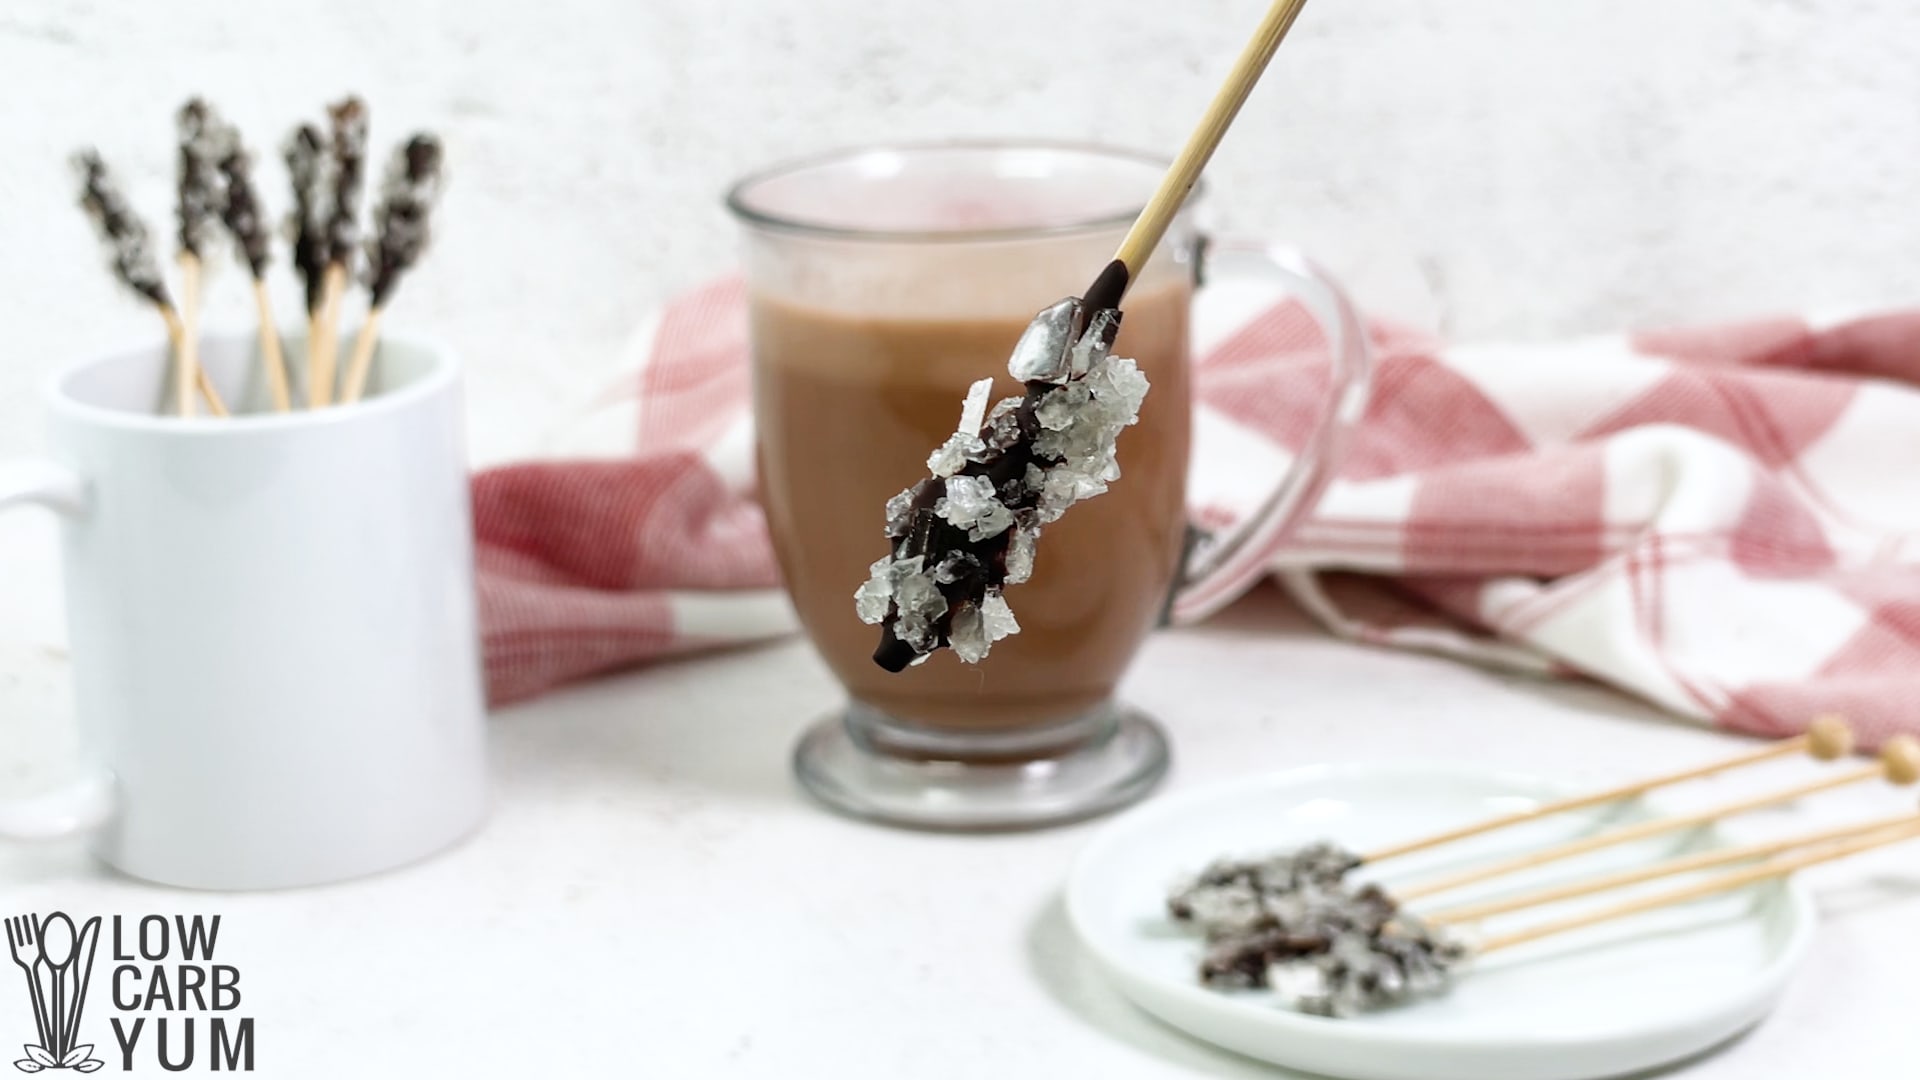 Heart Healthy Foods: How to Make Hot Cocoa Stirrers with Dark